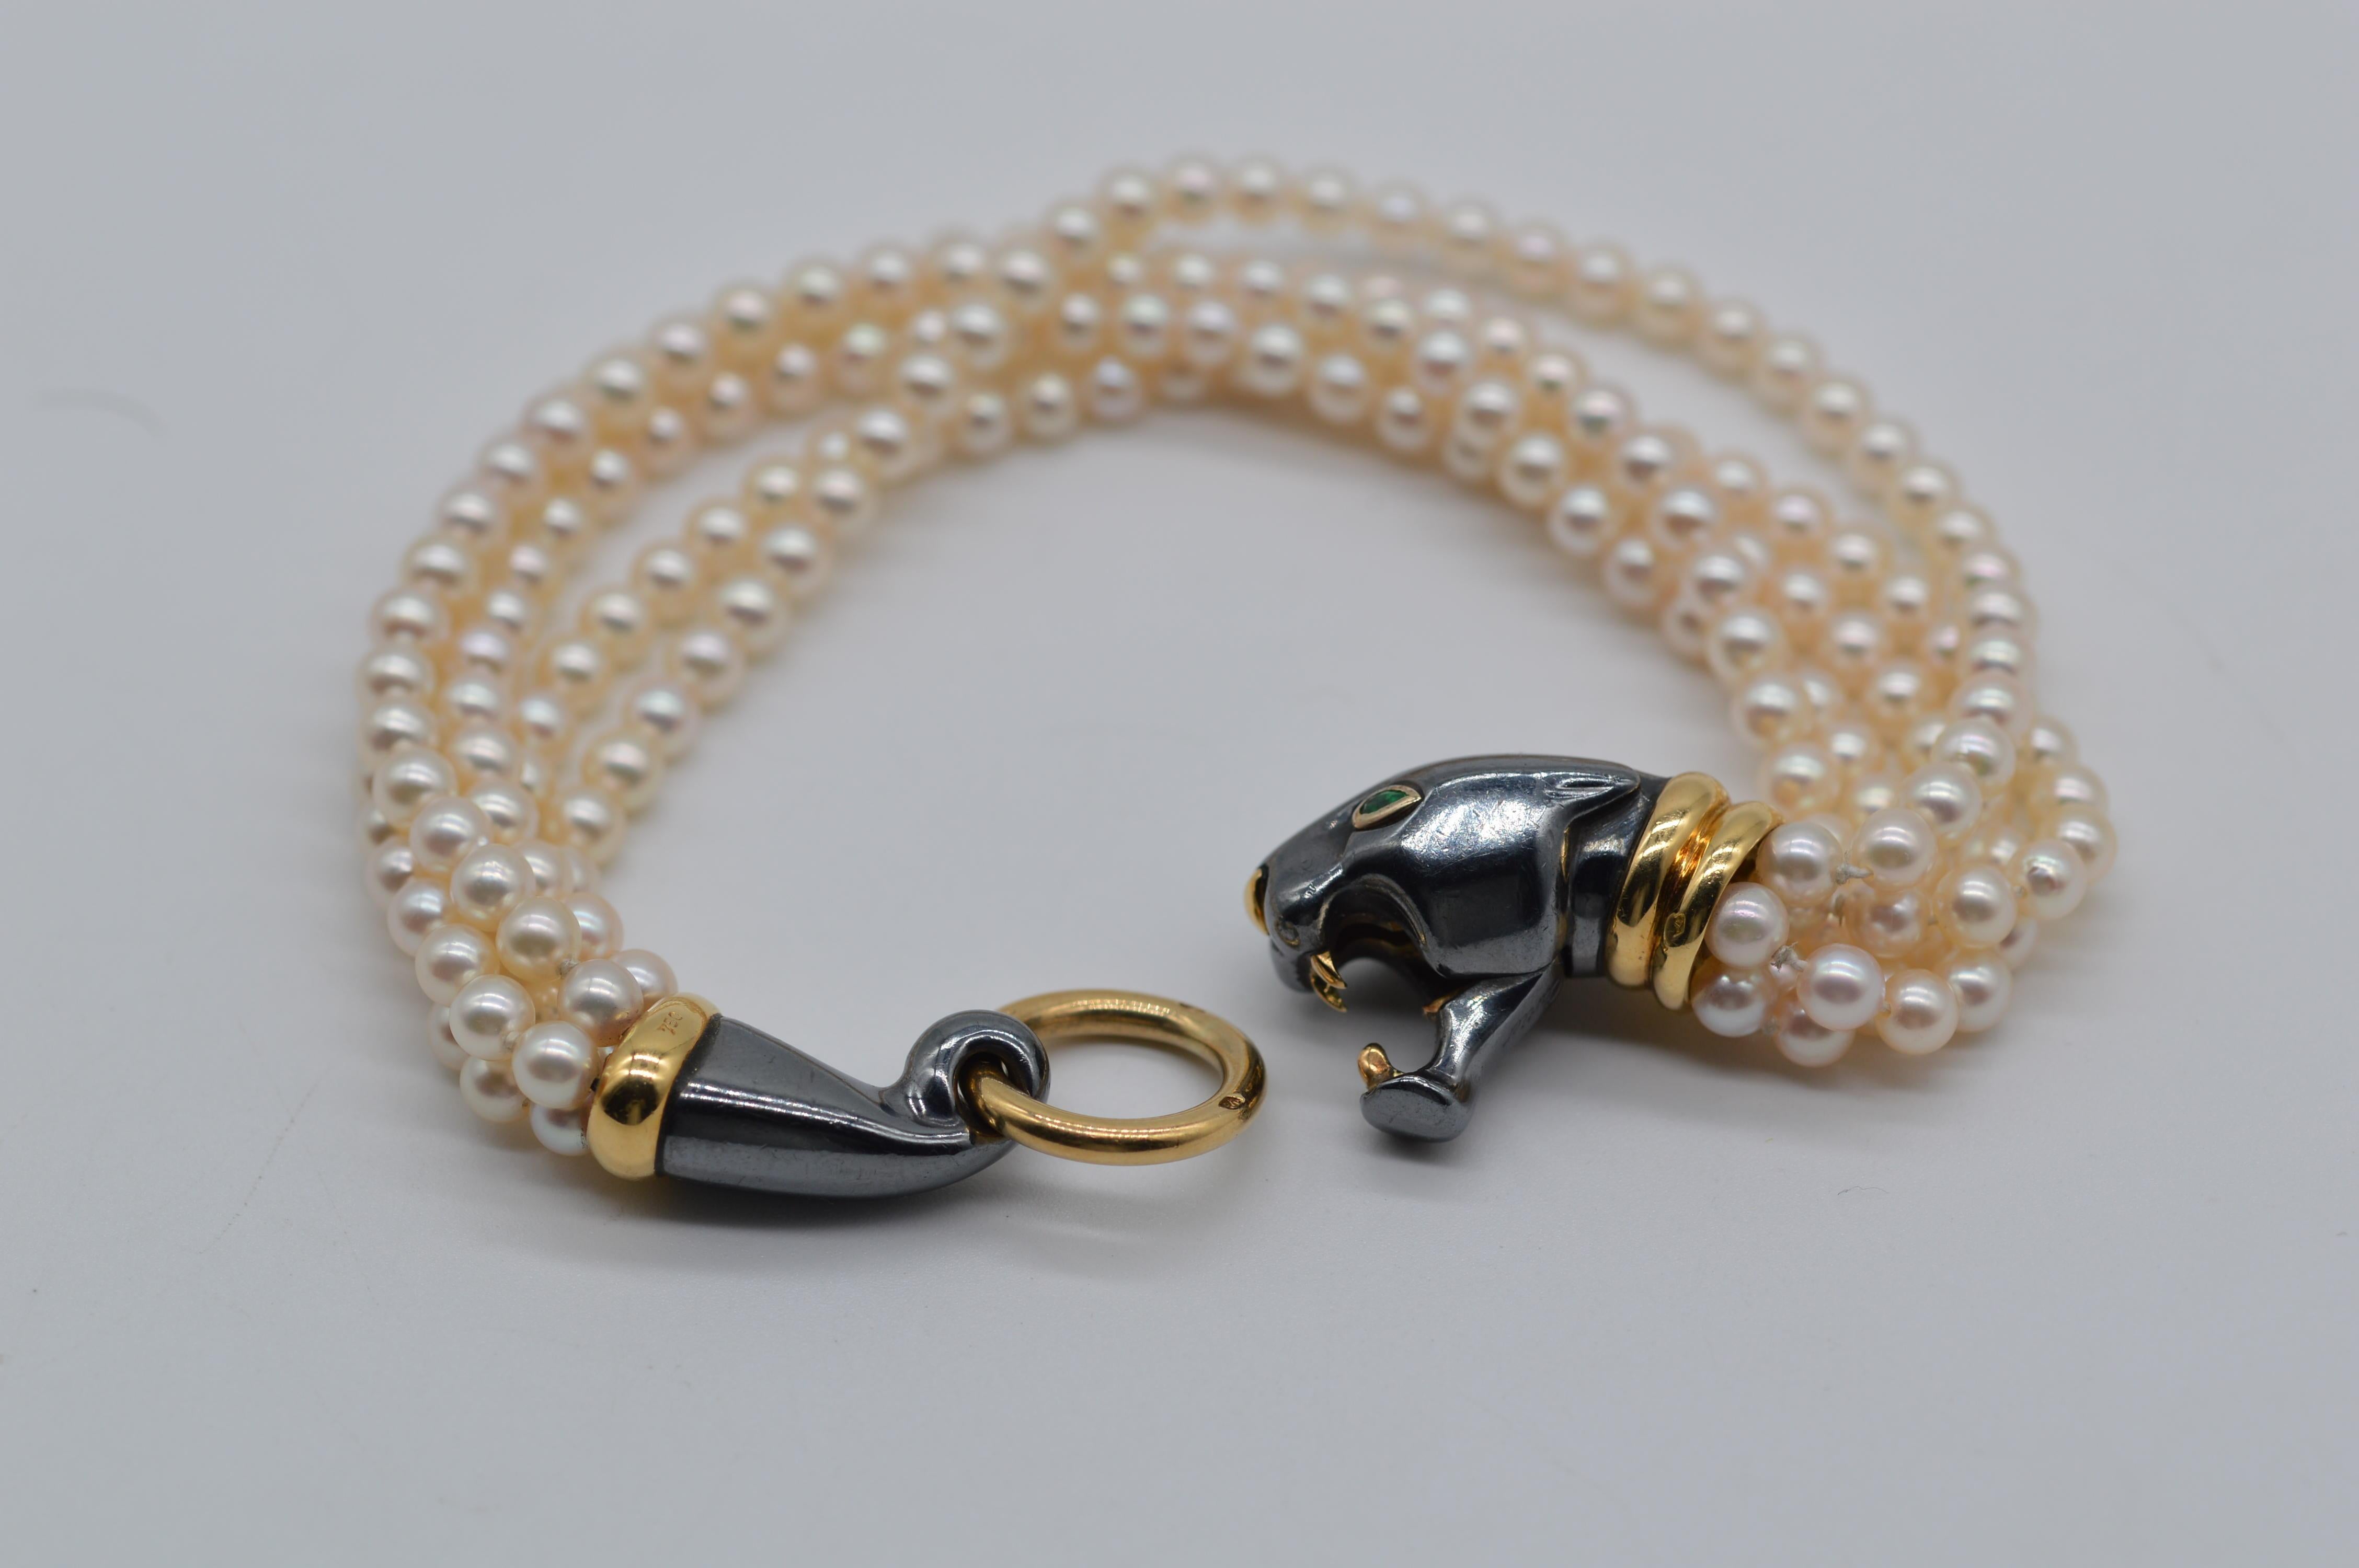 Cartier Panthère with Pearls Bracelet
18K Yellow Gold & Silver
5 Strands of Pearls & 2 Pearshape Emeralds Eyes
Weight is 35.3 grams
Akoya Japan Cultured Pearls
Vintage worn conditions
Approx. from early 2000's